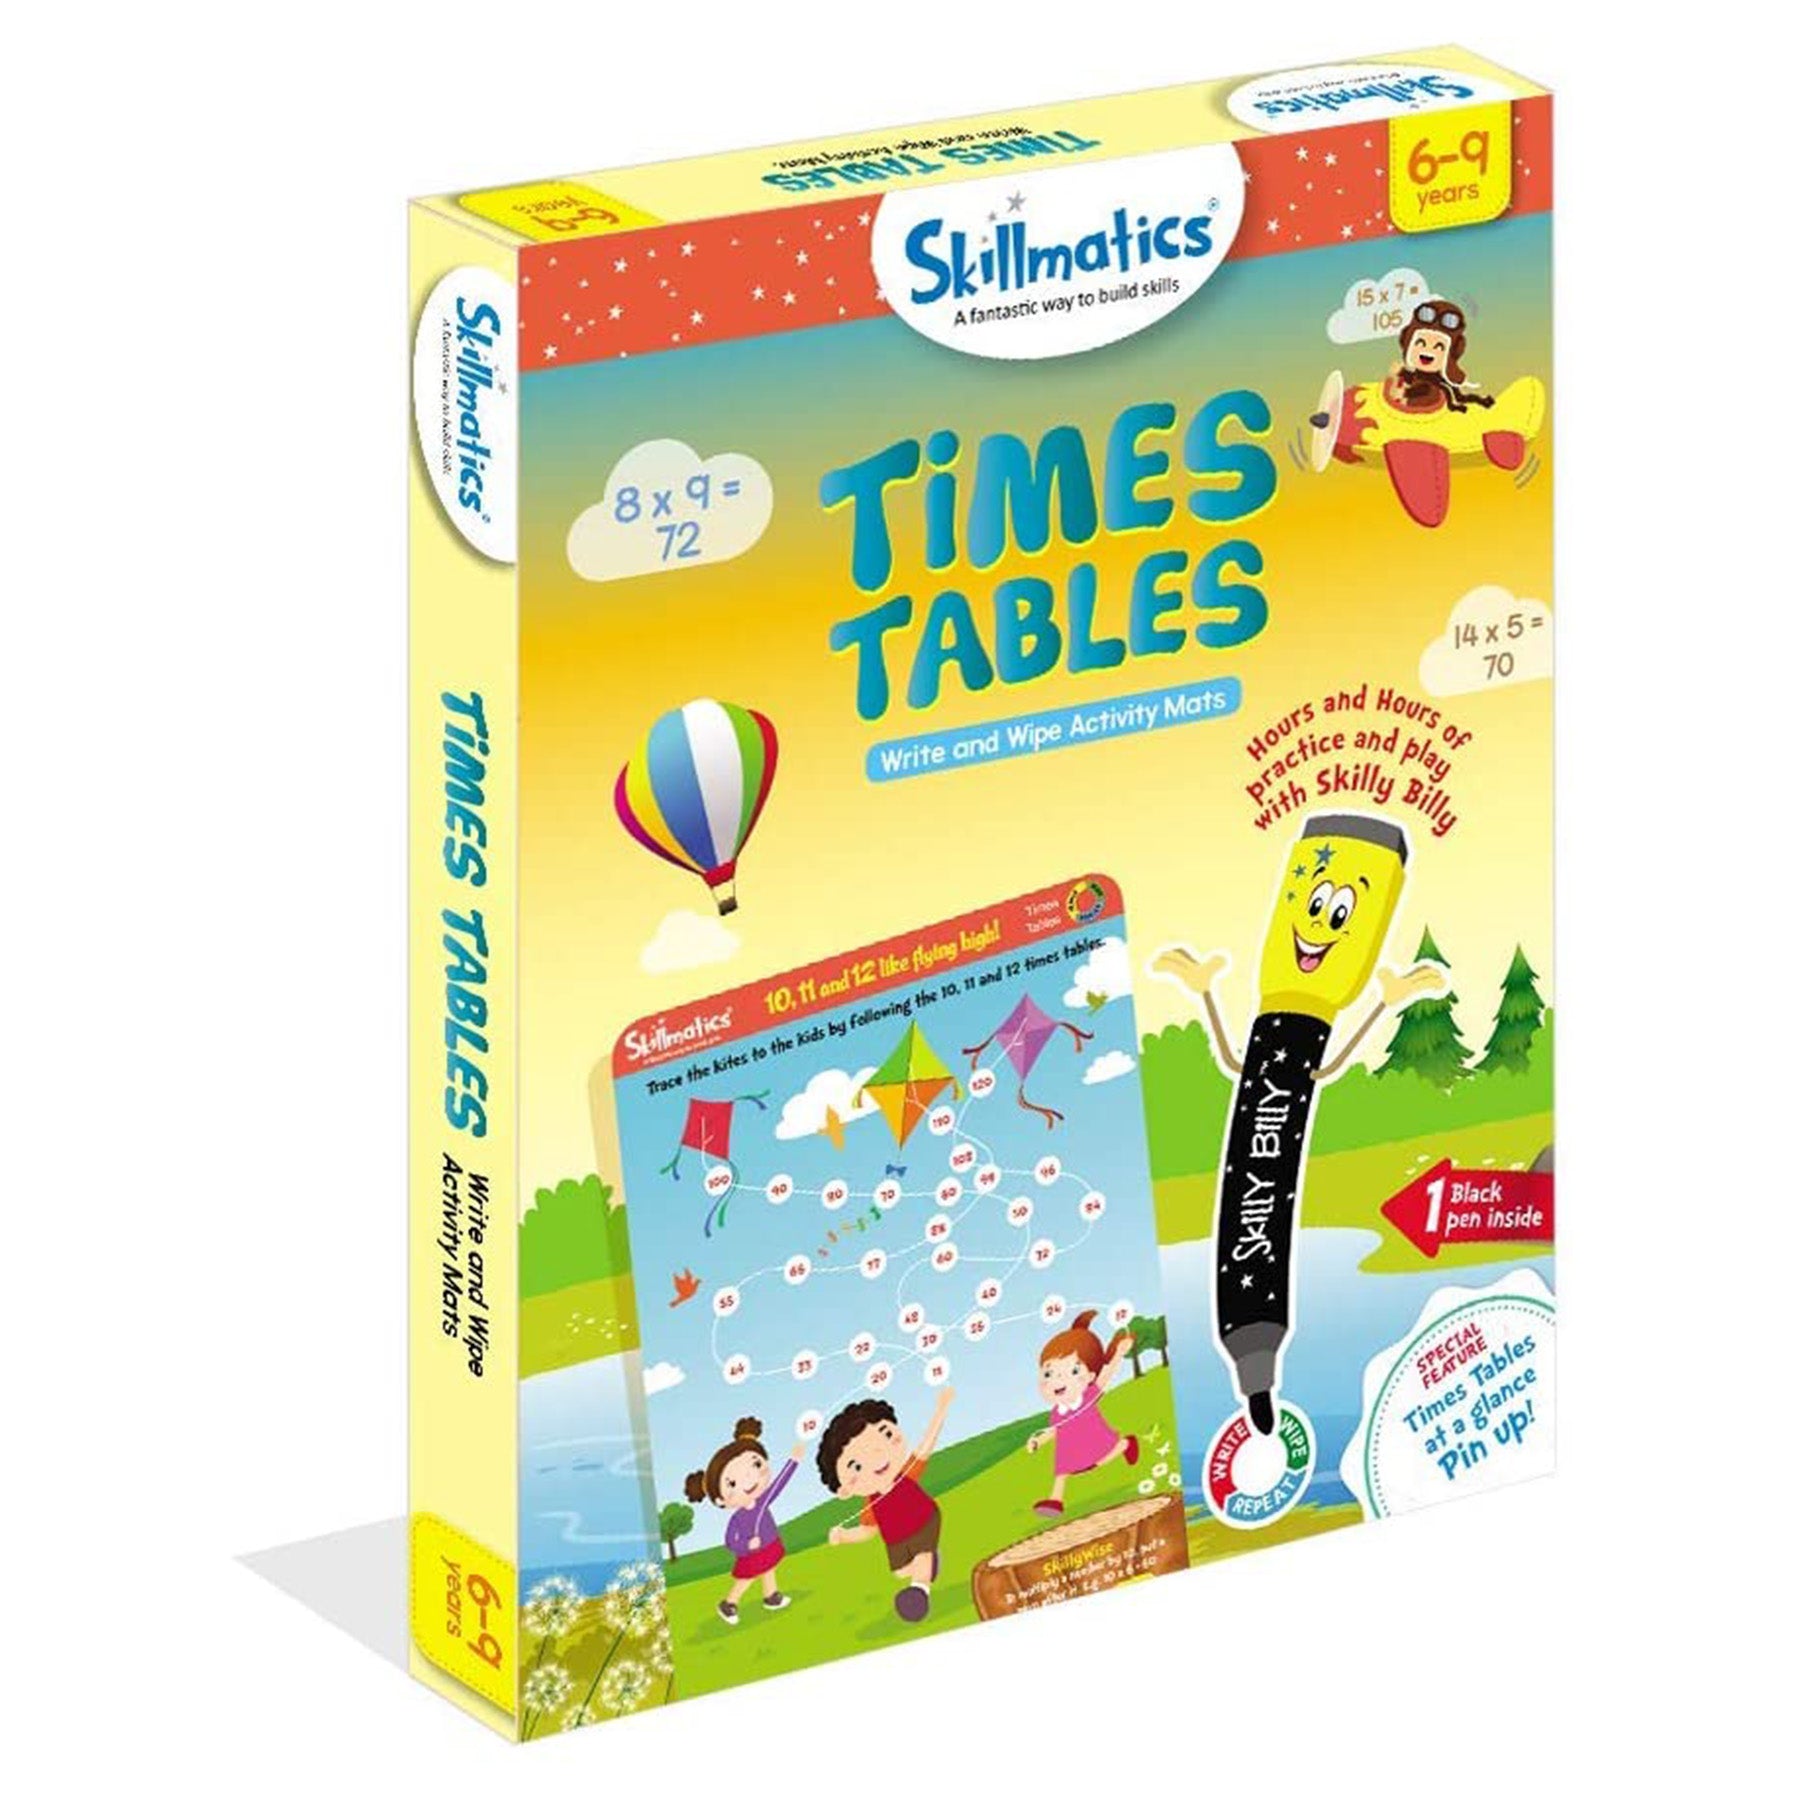 Time table book for kids